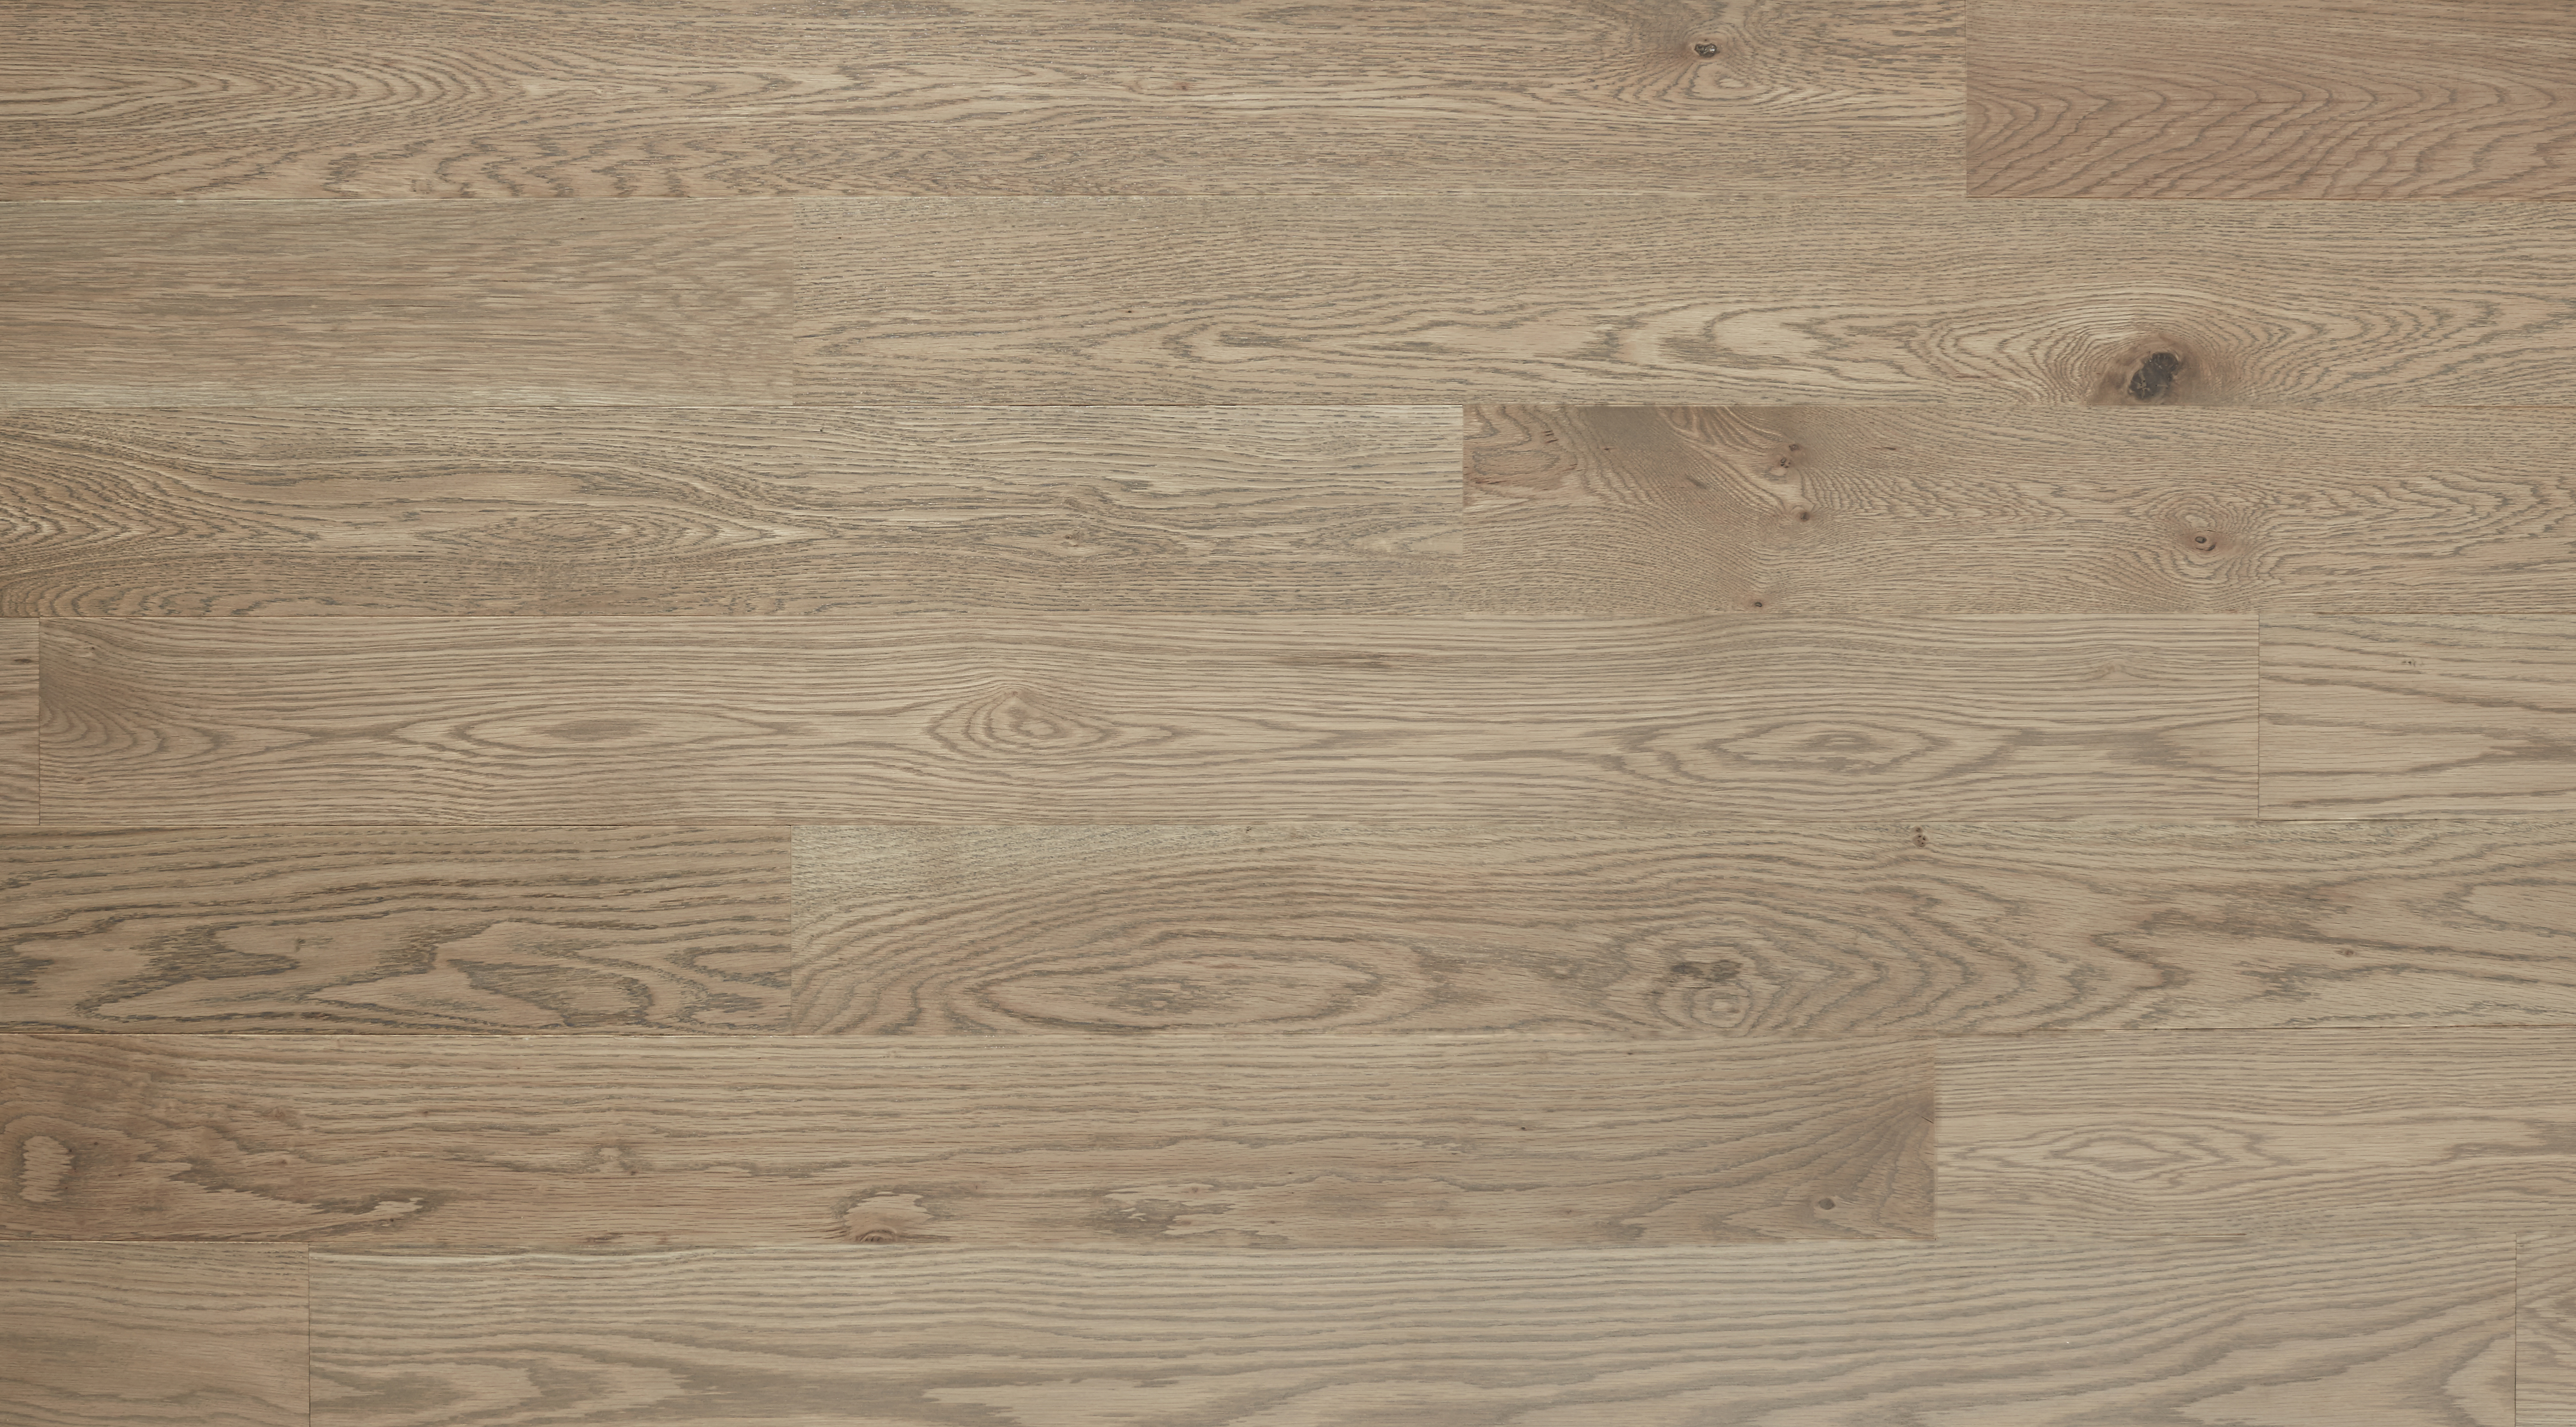 Product Images | Wooden floors